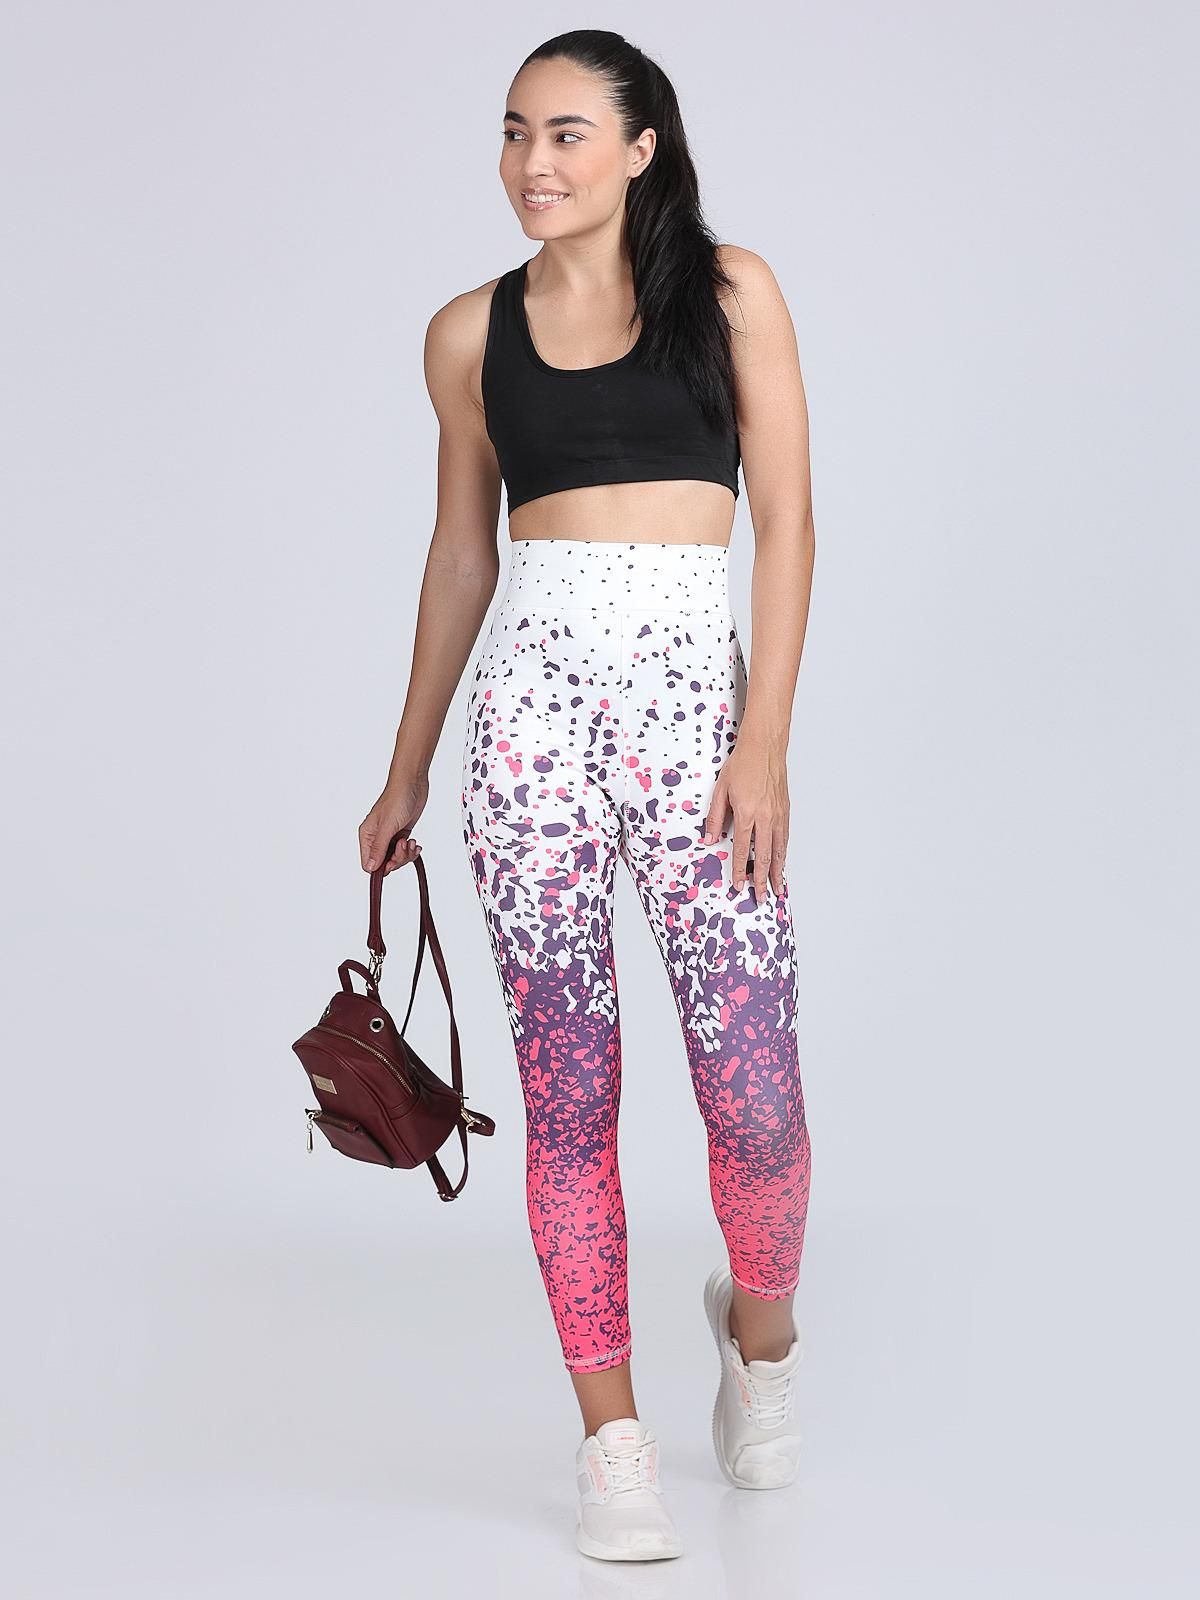 Women's 4-Way Lycra Stretch Yoga Pants with Dynamic Graphic Print – Unleash Style in Every Stride